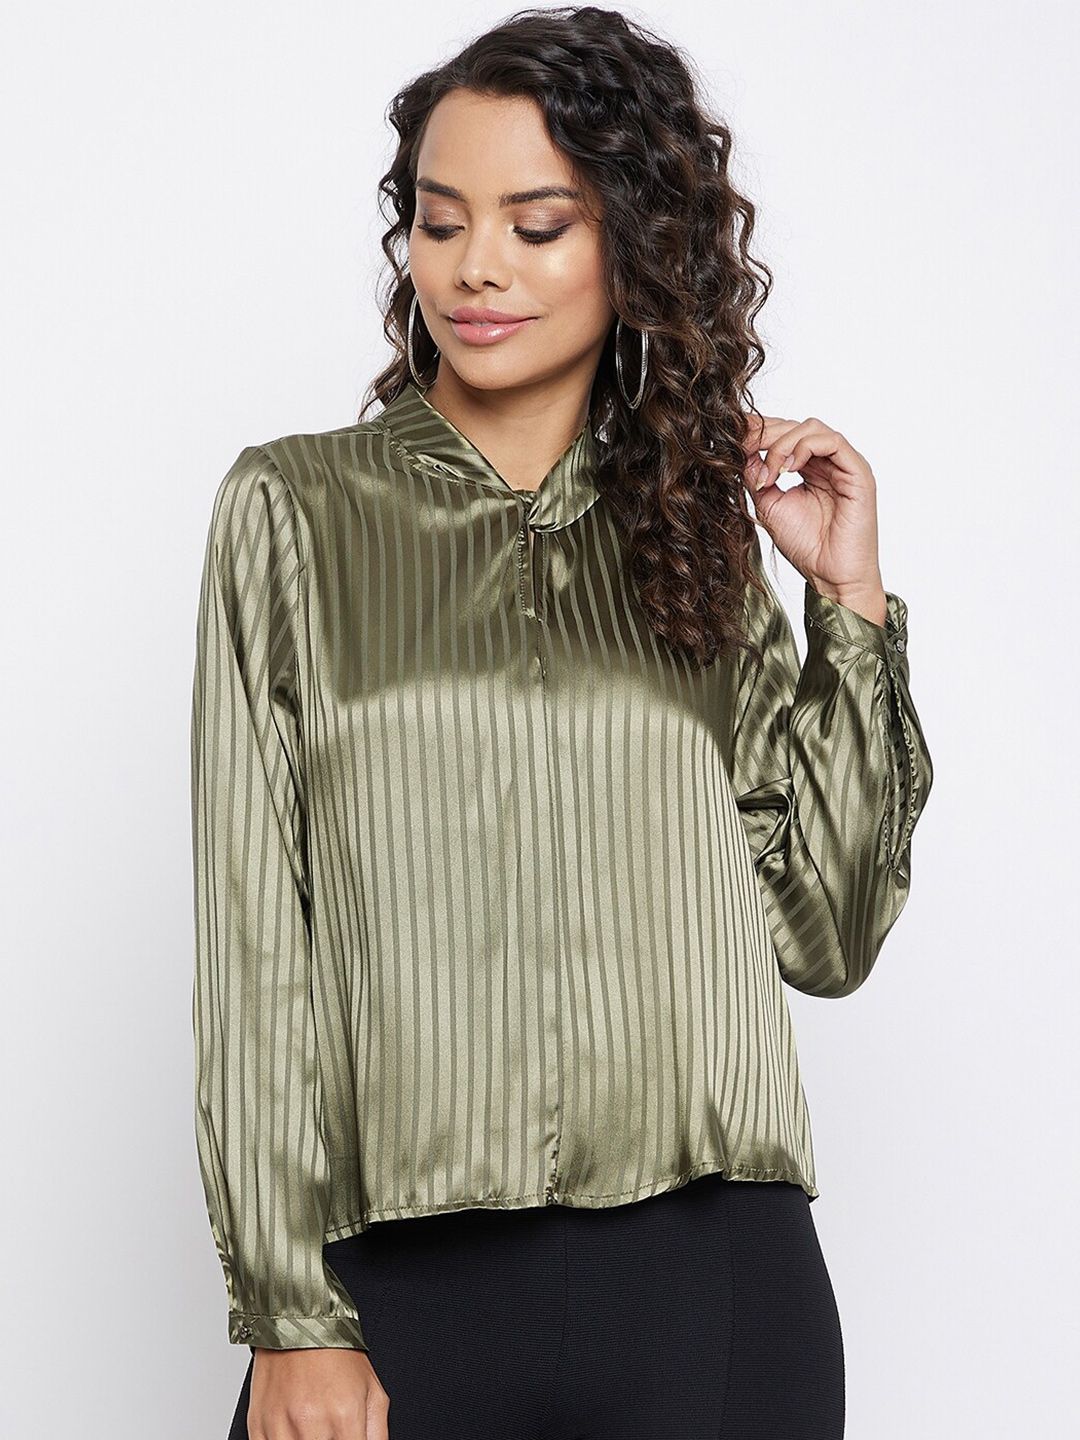 Madame Olive Green Striped Tie-Up Neck Shirt Style Top Price in India